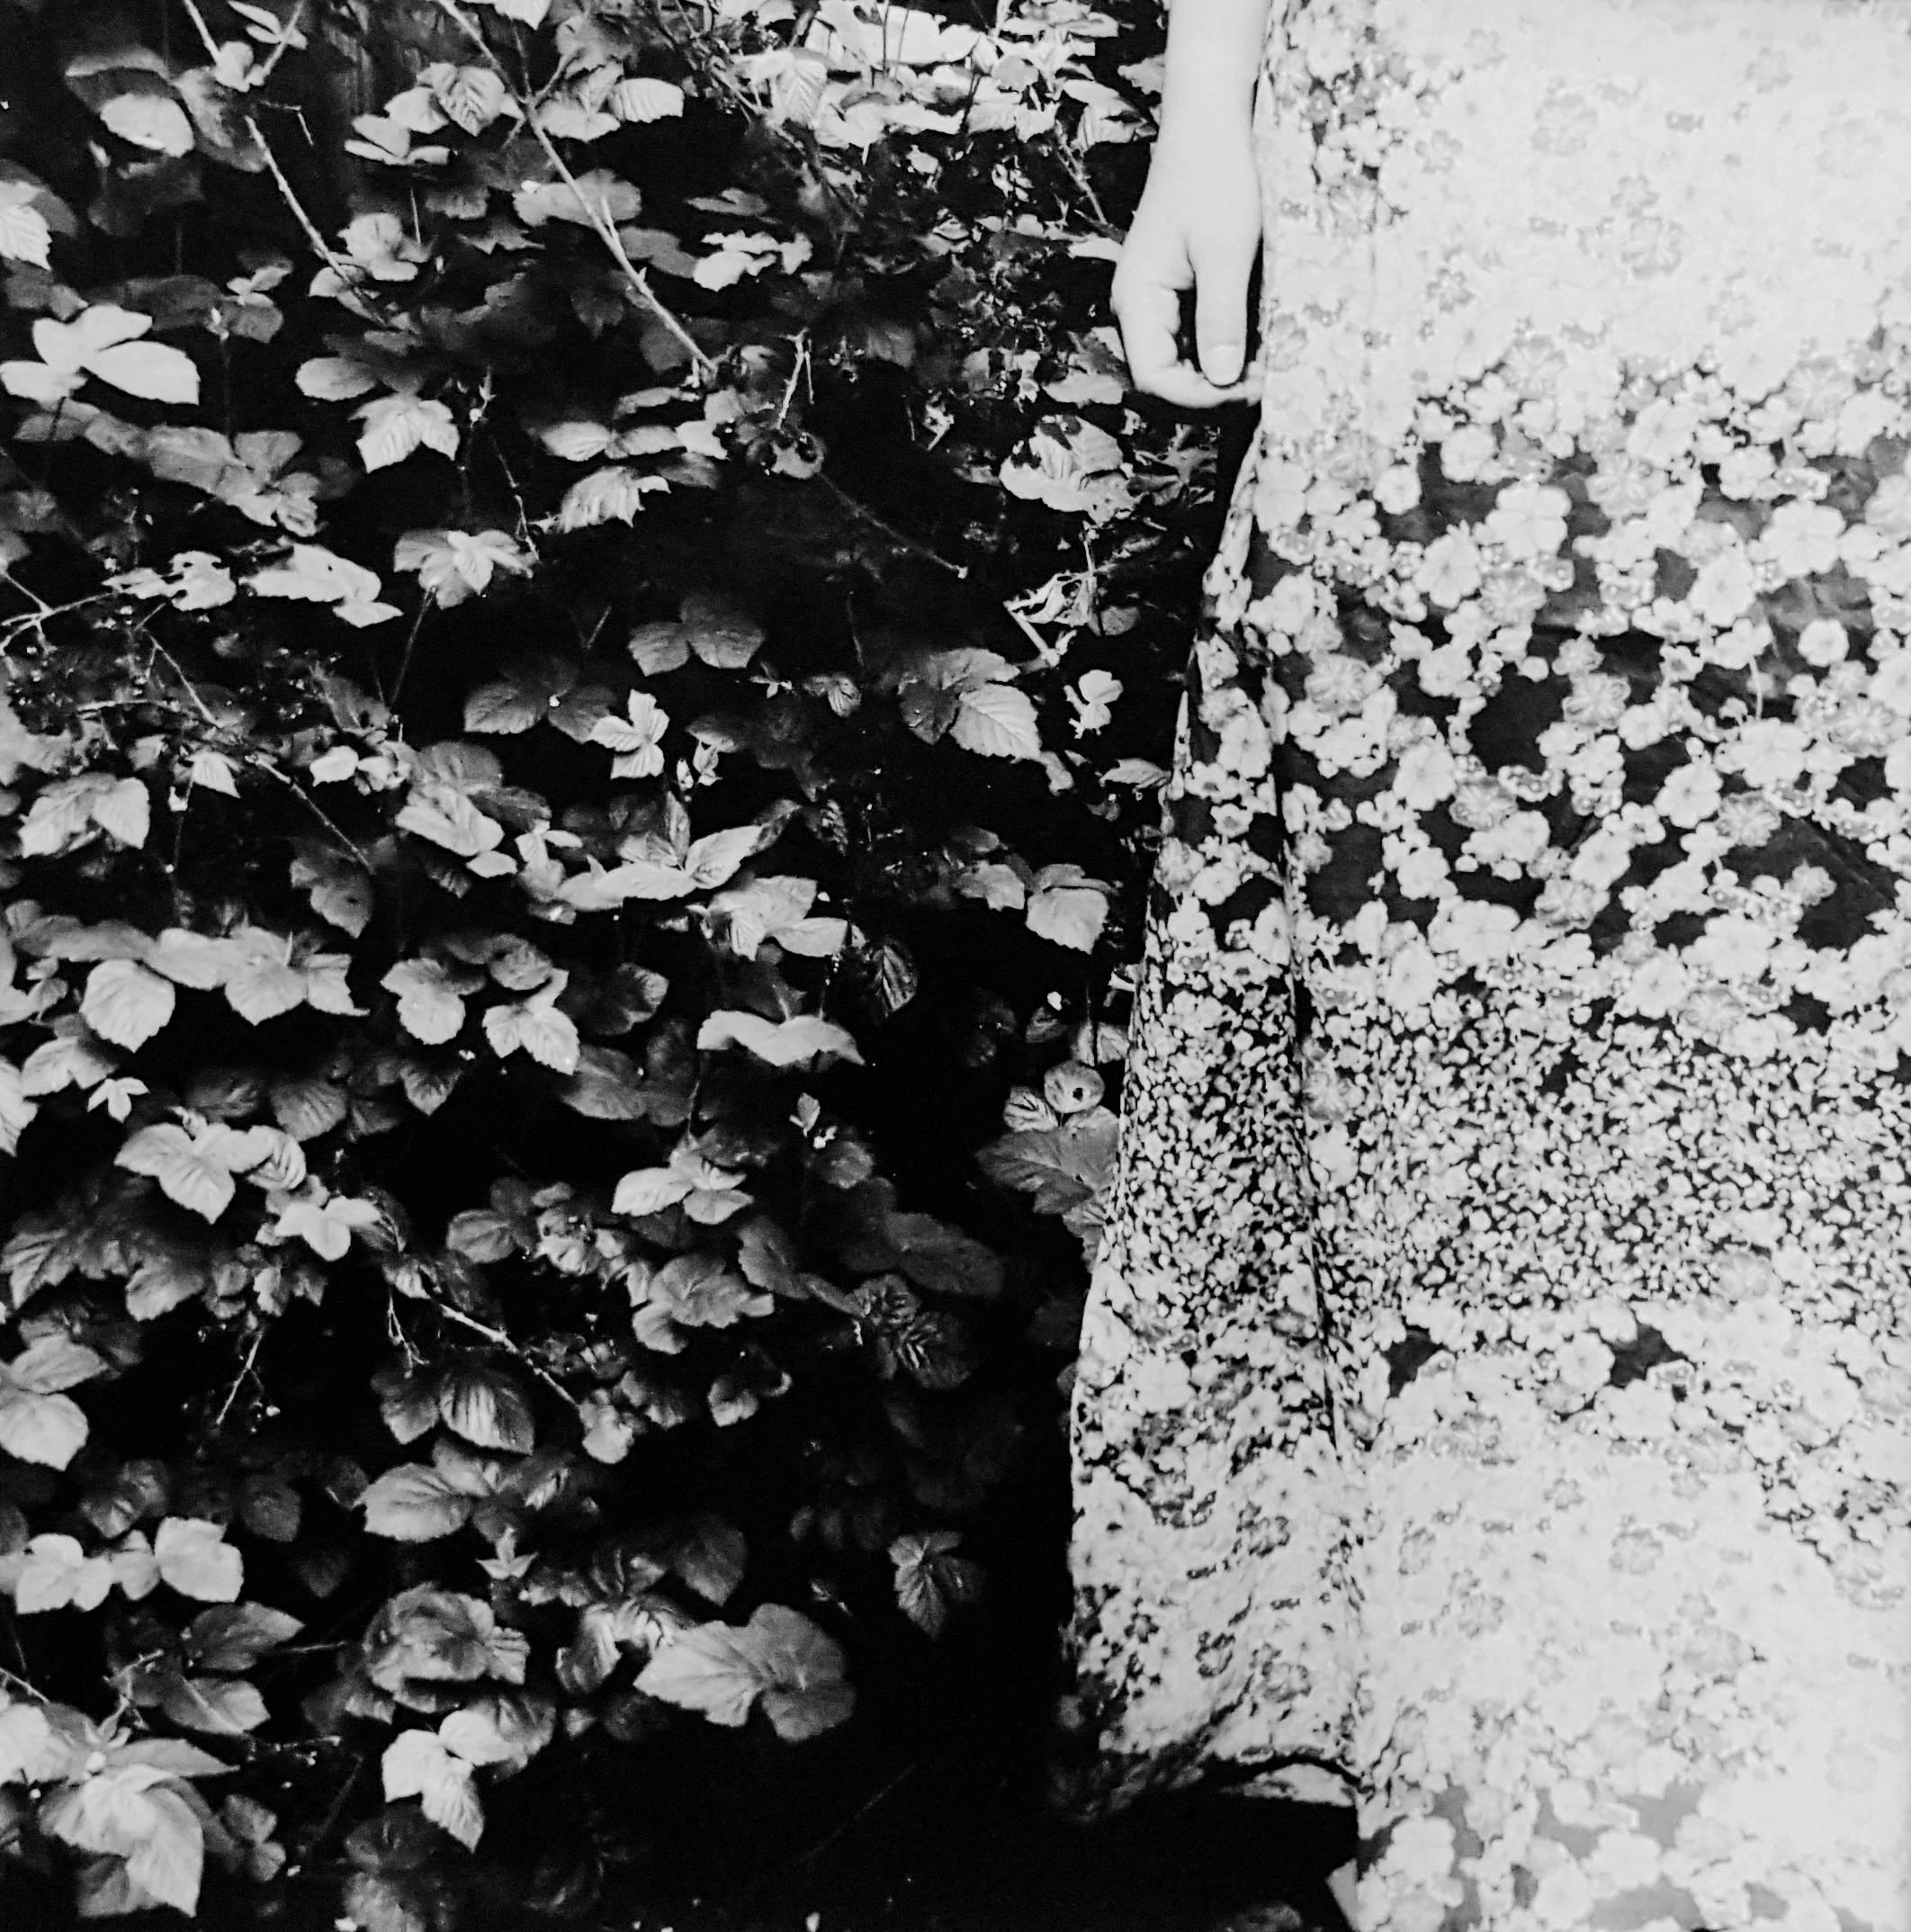 Gerlinde Miesenböck Black and White Photograph - Finding Home (Garden) - Triptych